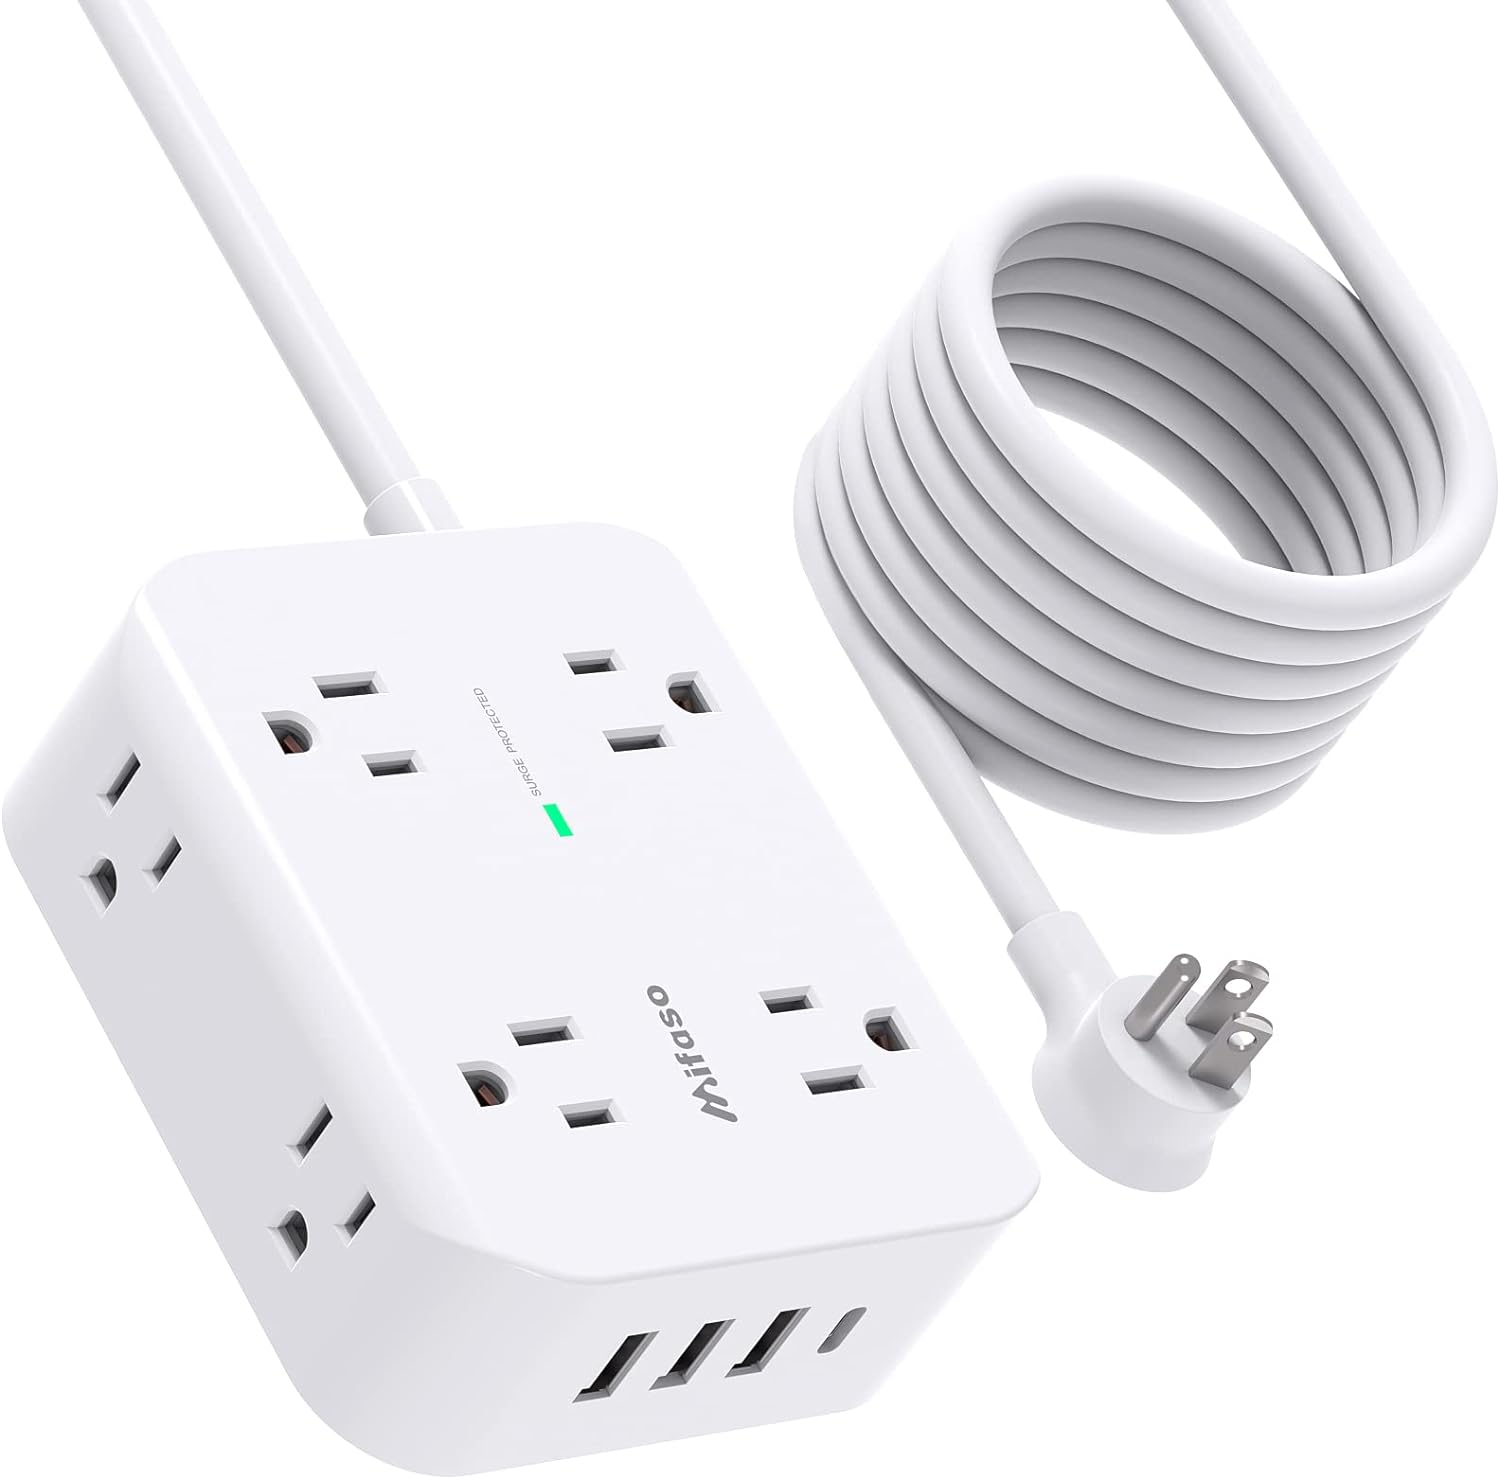 The Power Strip Surge Protector is an essential travel companion, offering exceptional versatility and convenience. With eight wide outlets and four USB ports, including one USB-C, it easily accommodates a variety of devices, making it perfect for hotel stays. The flat plug design and wall-mount capability are thoughtful features that save space and allow for easy placement in often cramped hotel rooms. Its surge protection offers peace of mind, safeguarding devices from unexpected power surges.